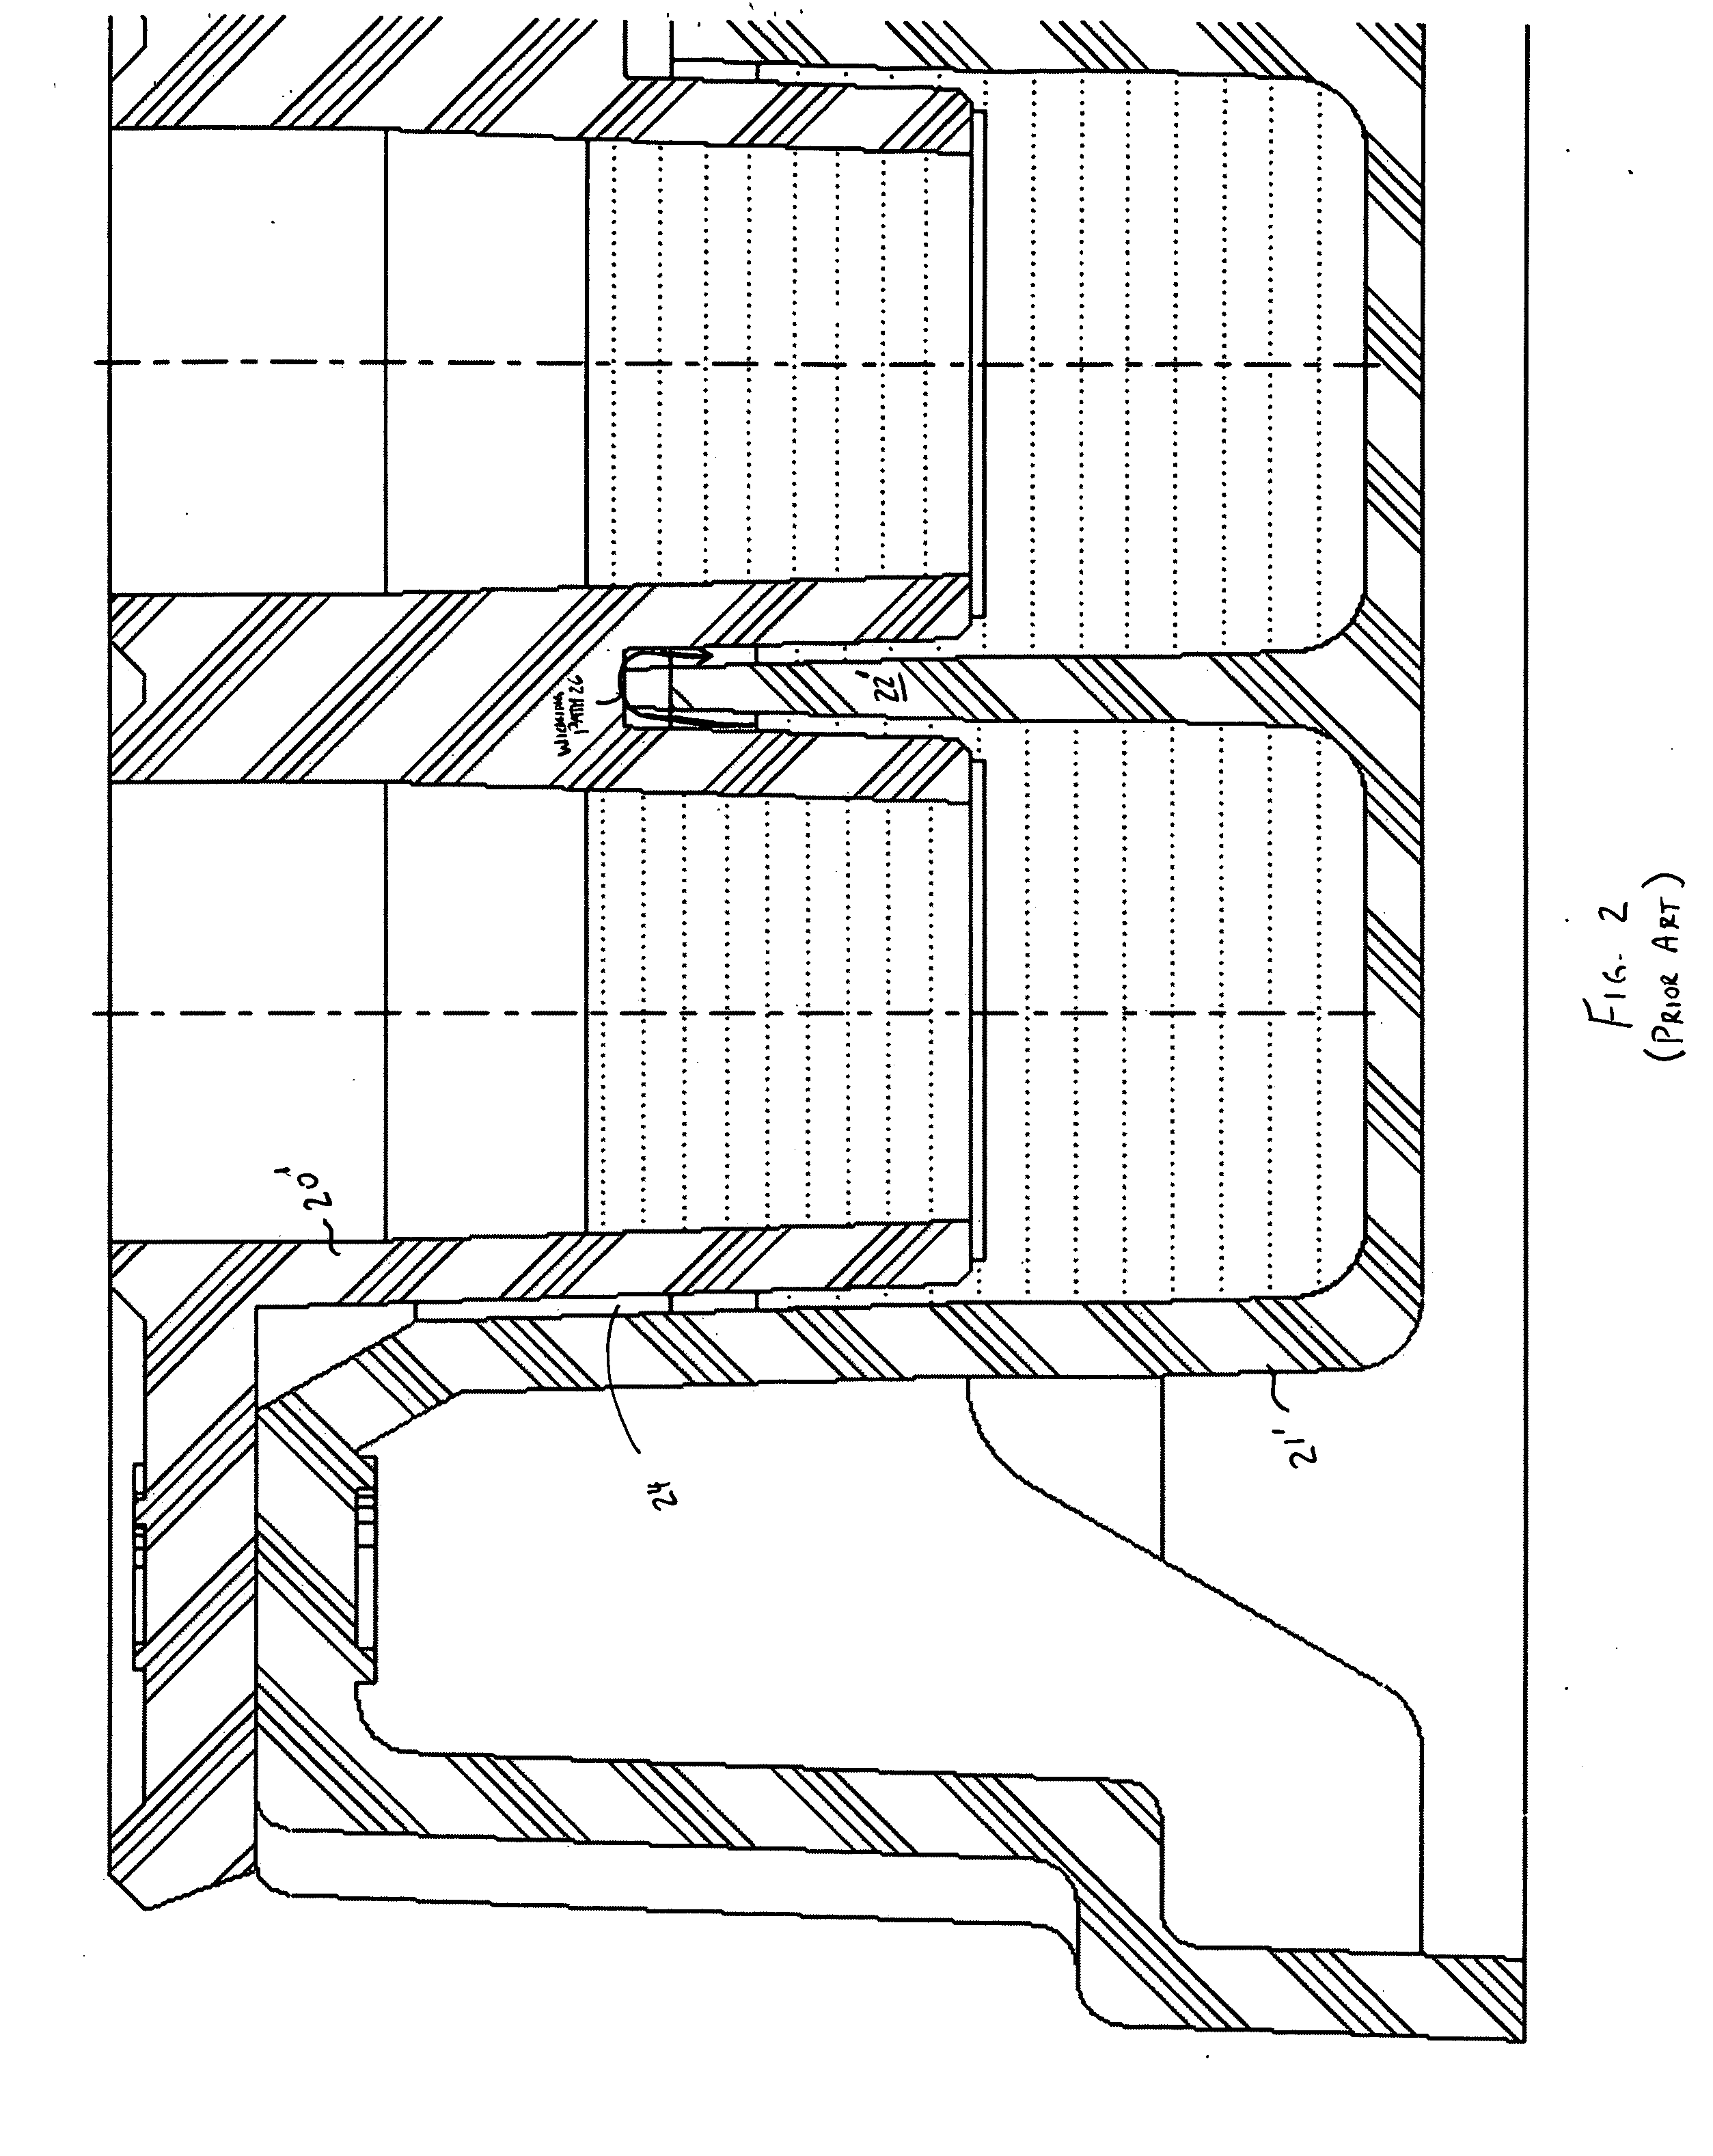 Receiver plate with multiple cross-sections